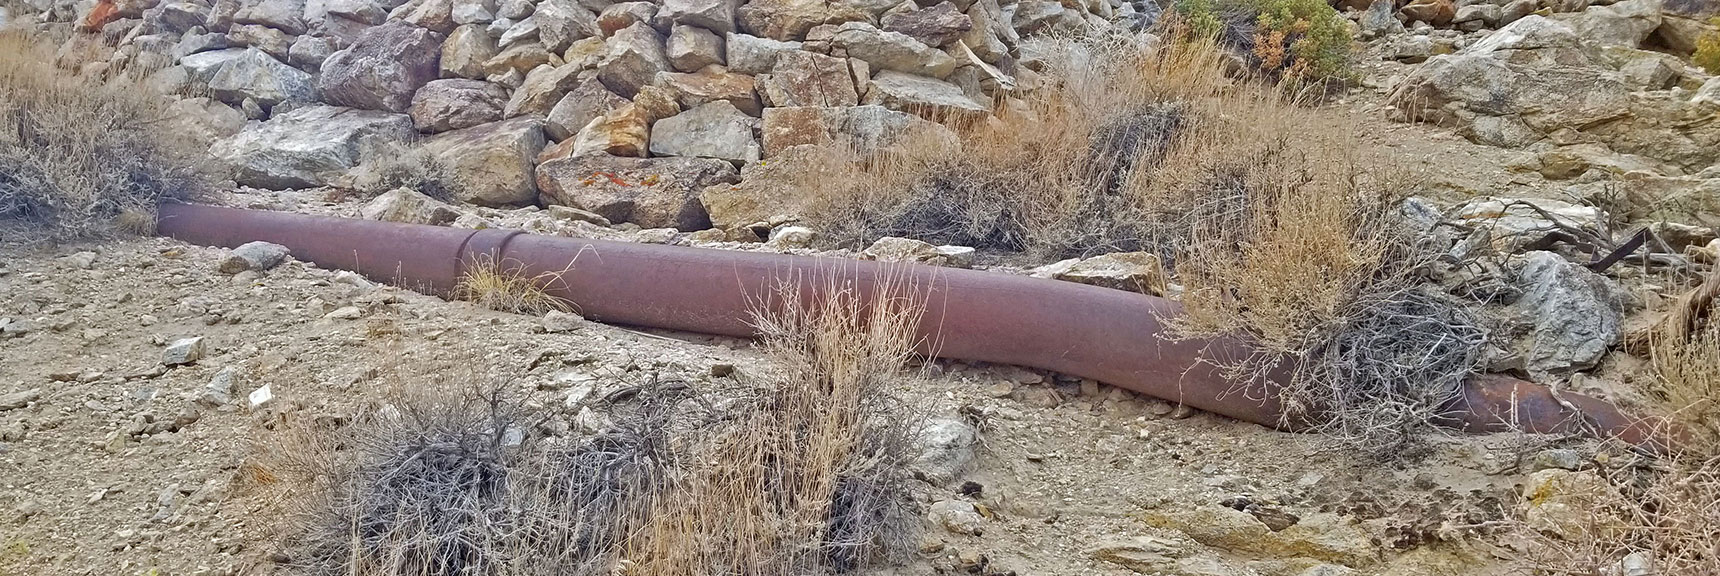 Final Section of the Water Pipe from Telescope Peak Spring? | Skidoo Stamp Mill, Panamint Mountains, Death Valley National Park, CA